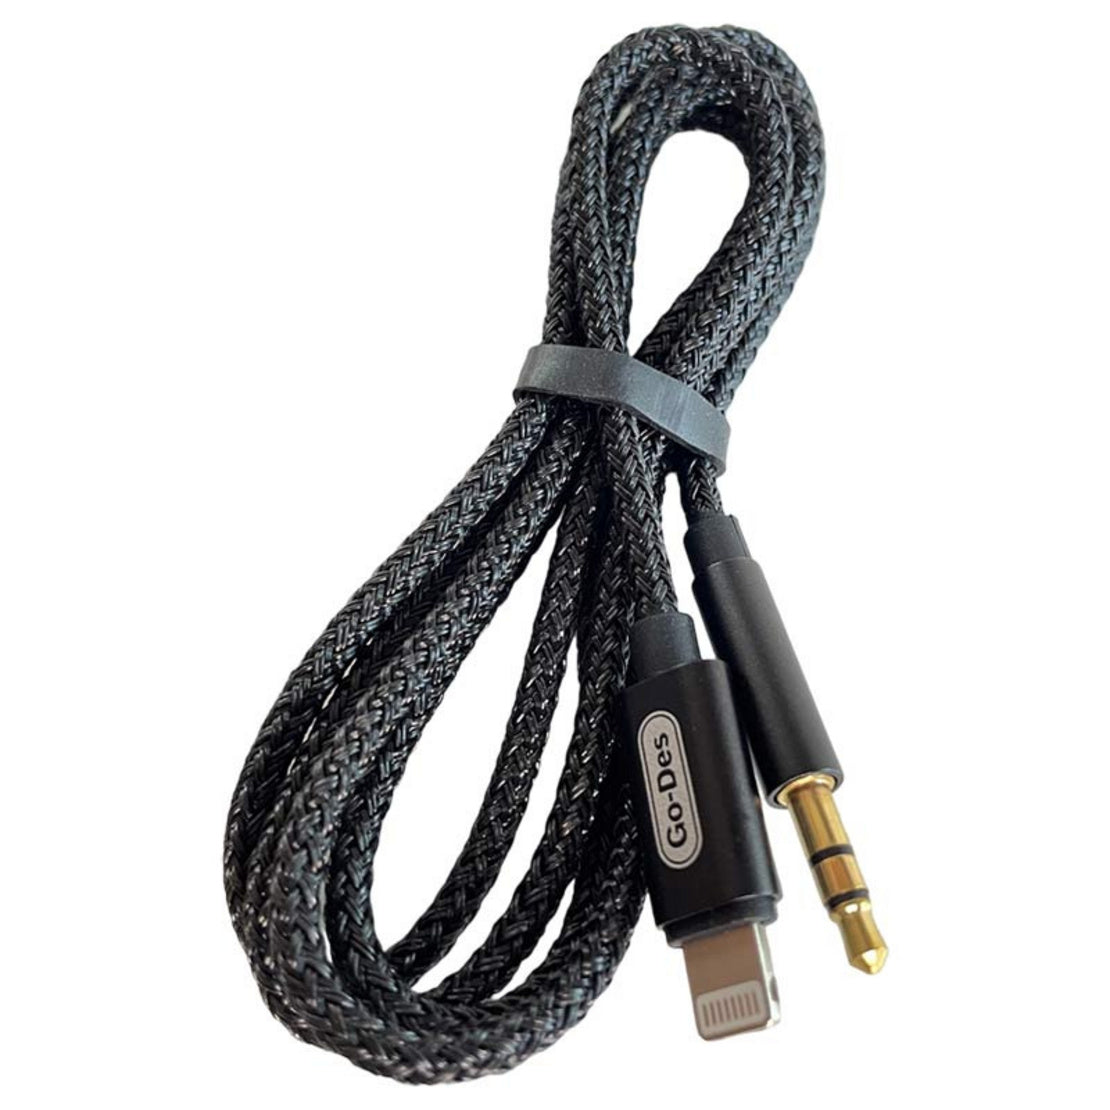 GO-DES Adapter Cable Audio Experience with AUX Connectivity